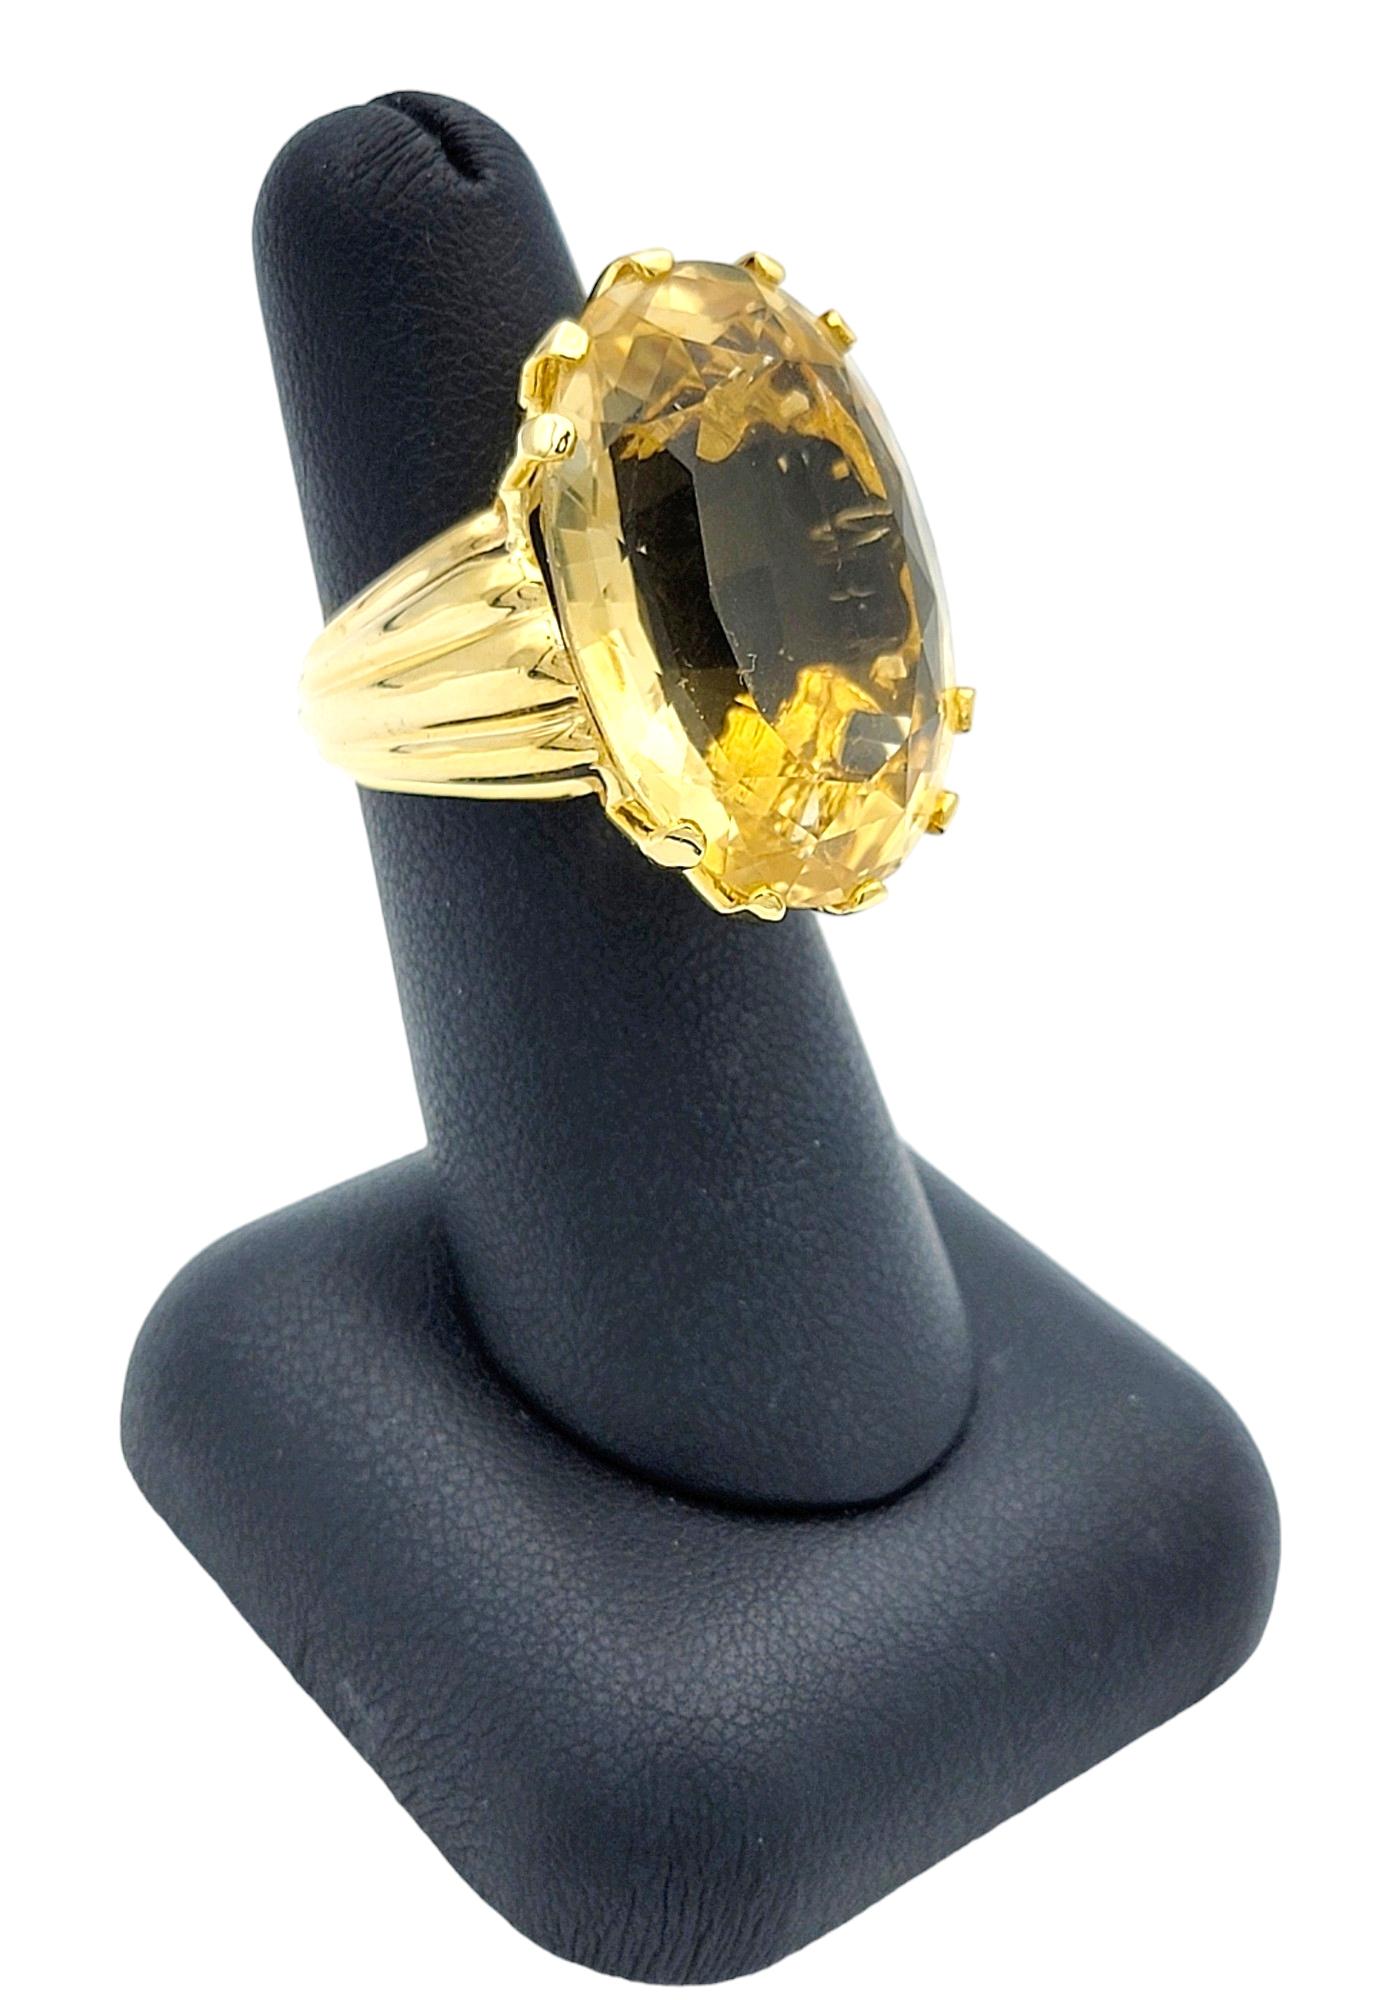 Huge 29.25 Carat Oval Citrine Solitaire Cocktail Ring in 14 Karat Yellow Gold For Sale 5